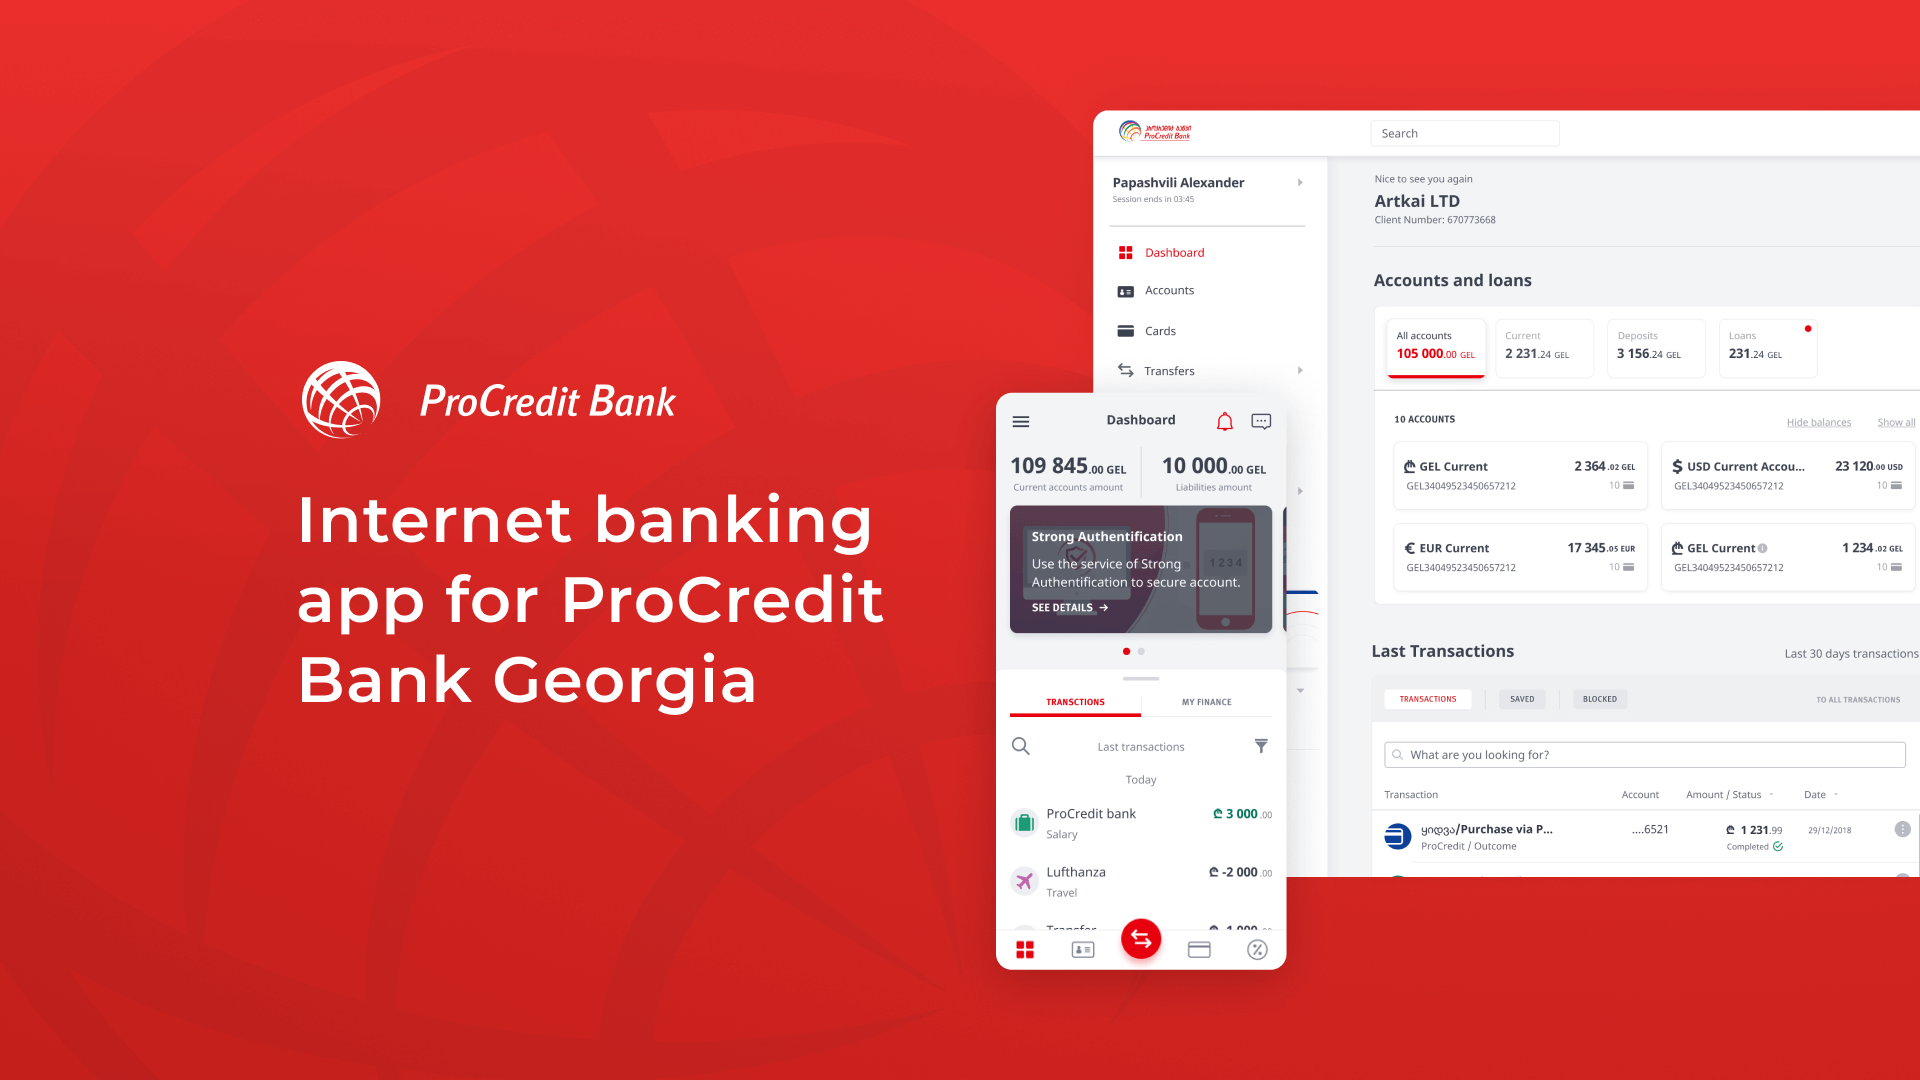 Upgraded internet banking experience for ProCredit bank Georgia ...